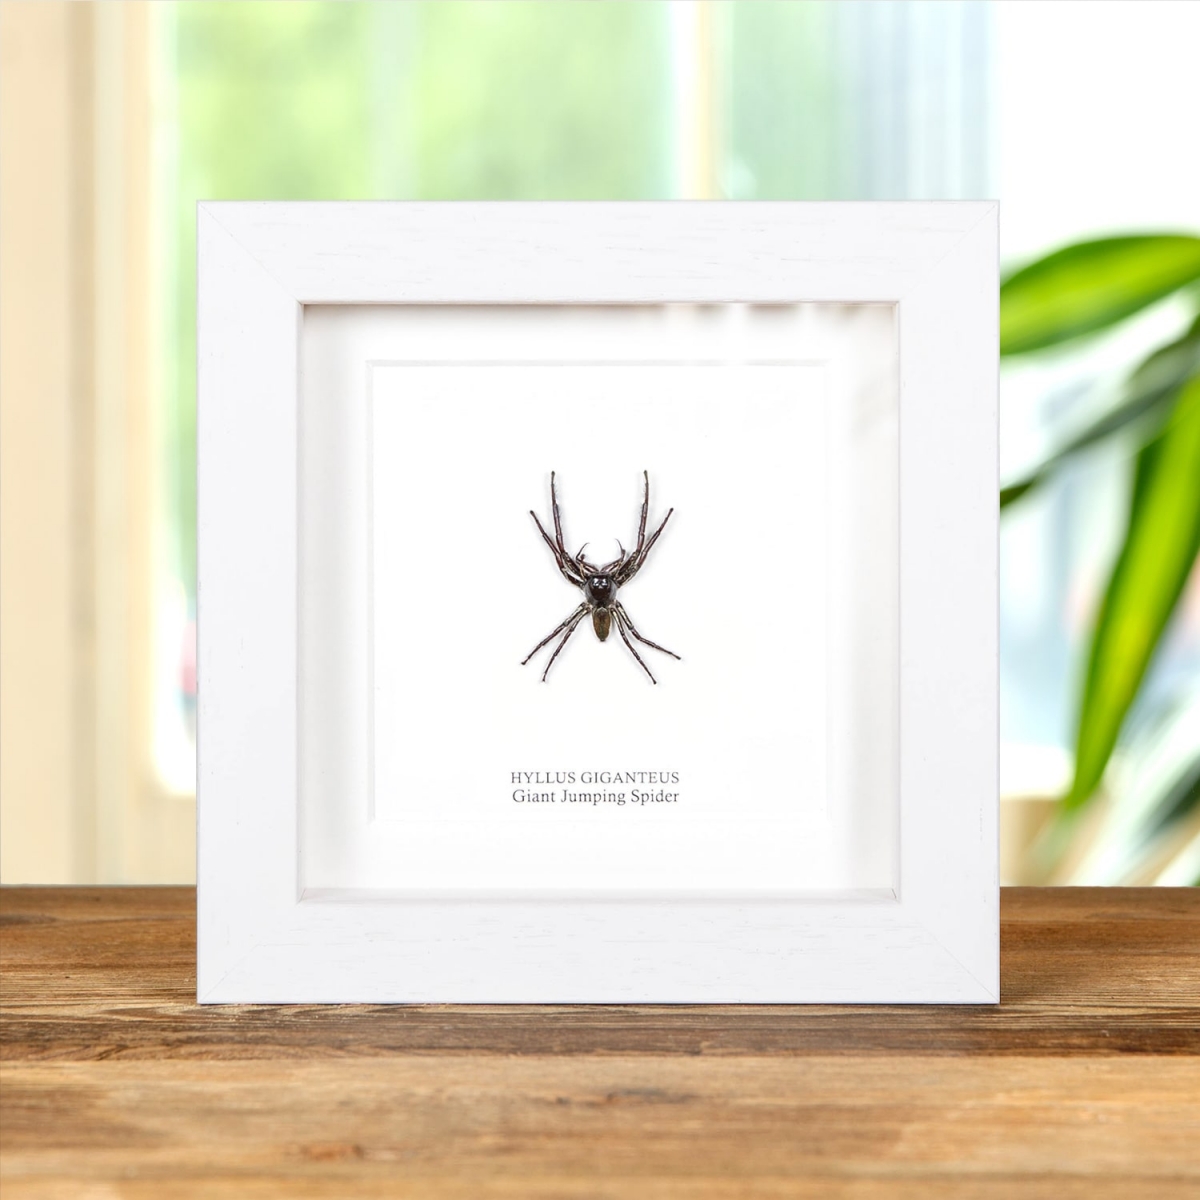 Worlds Largest Giant Jumping Spider in Box Frame (Hyllus giganteus)